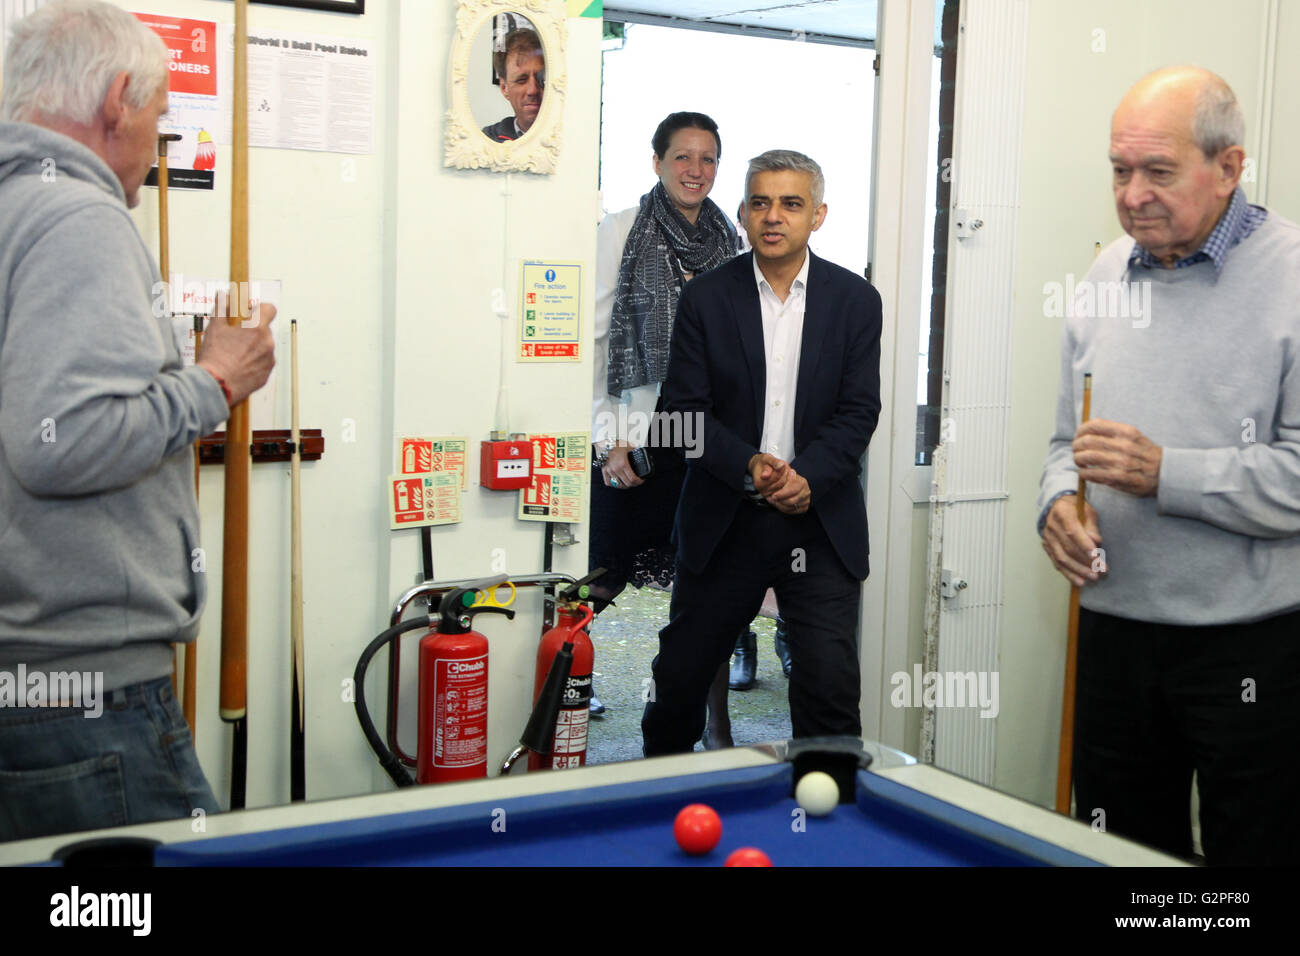 London, UK. 1st June, 2016. The Mayor of London, Sadiq Khan joins older Londoners and volunteers of all ages in a pool tournament and making over a community centre garden, as he pledges to make social integration a core priority. The volunteers are taking part in Team LondonÕs ÔRun To Do GoodÕ which marks the start of VolunteersÕ Week and a month of activities for London s the European Volunteering Capital Credit:  Dinendra Haria/Alamy Live News Stock Photo